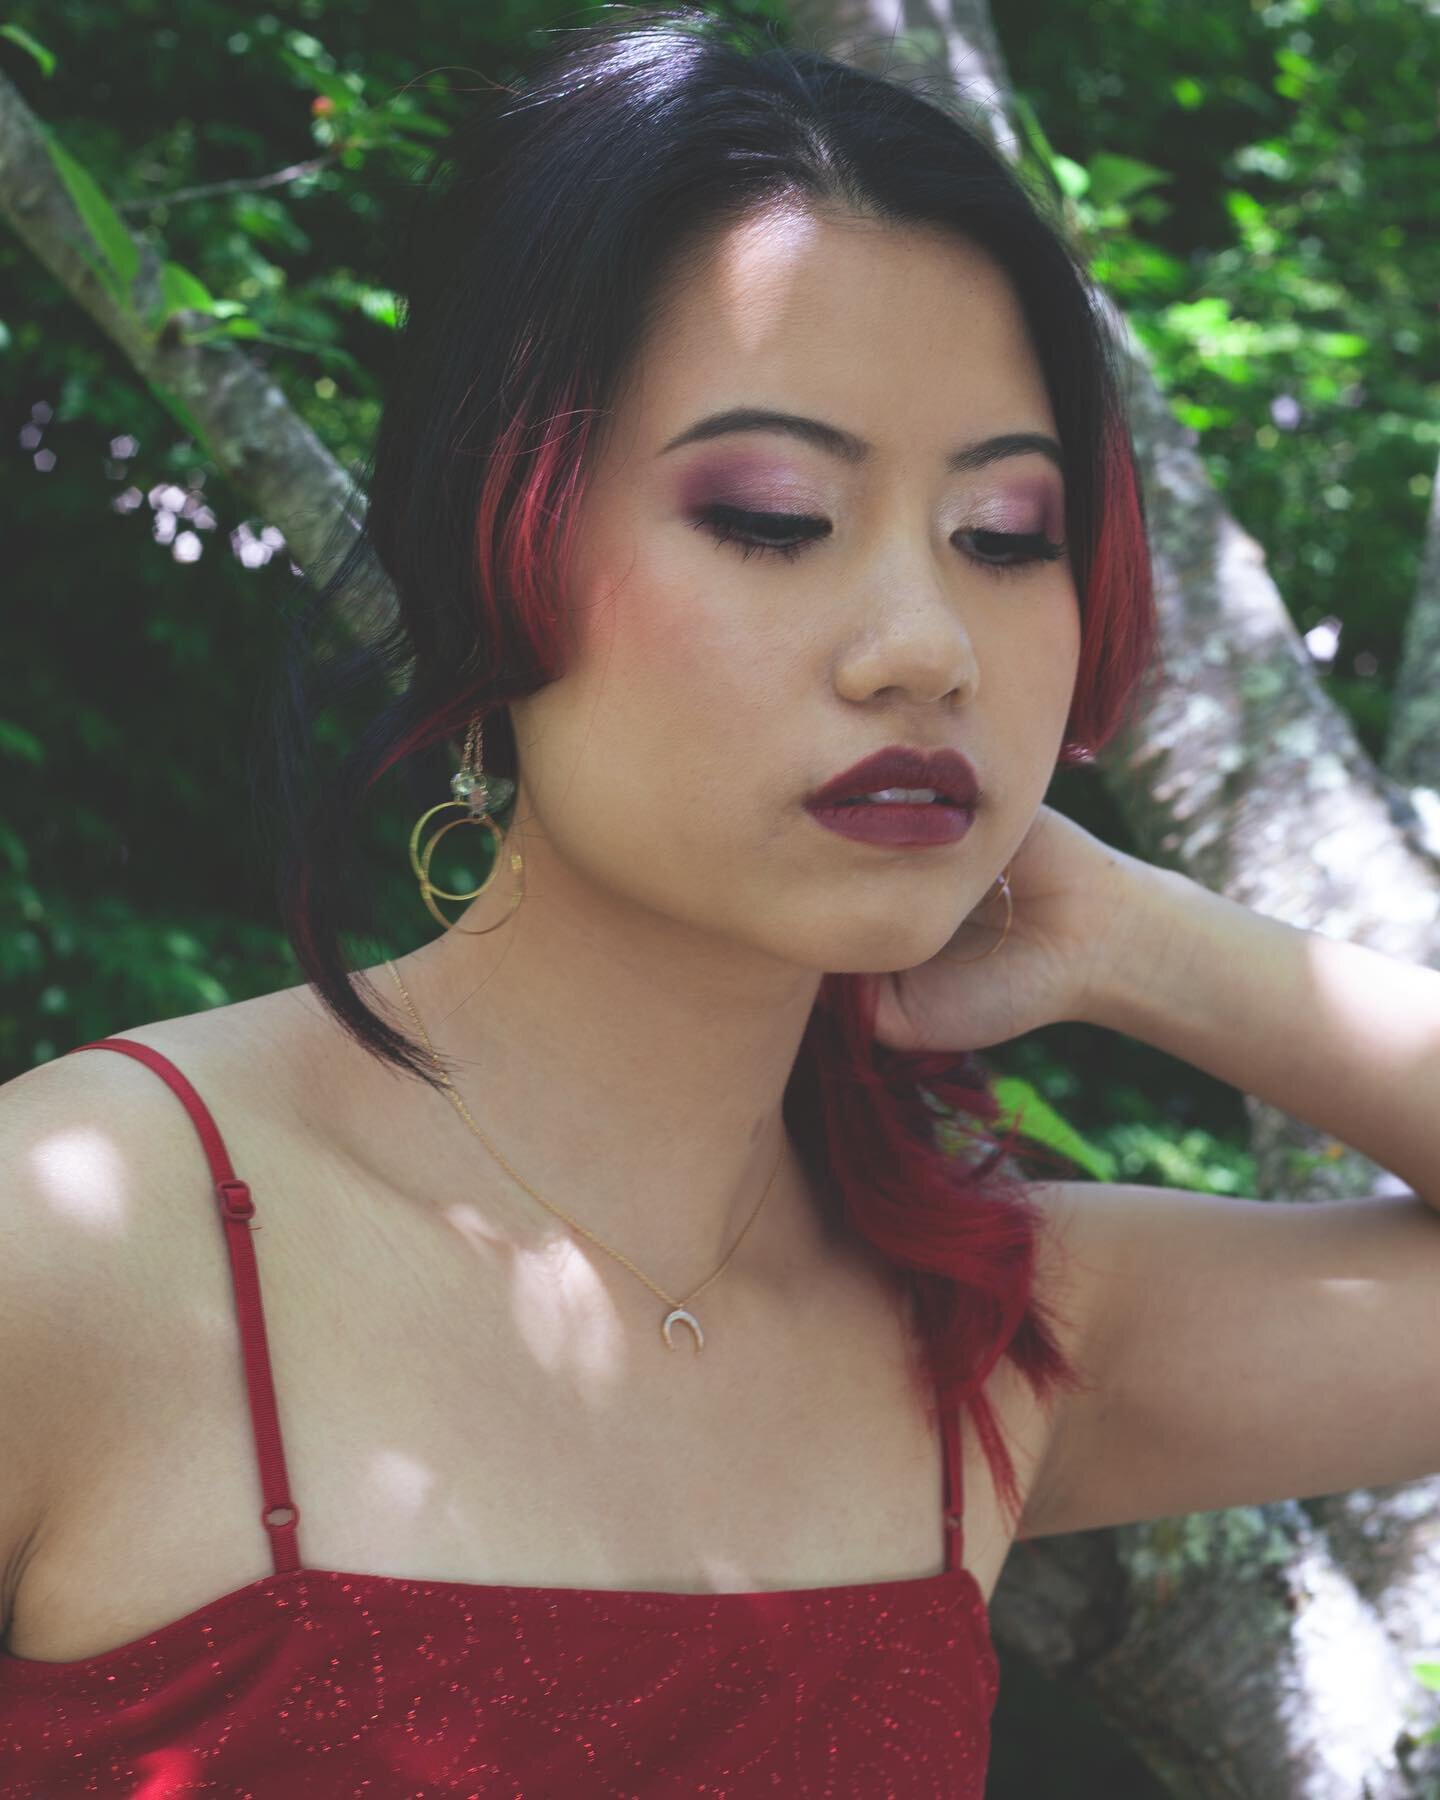 Some of my favorites from this styled shoot with lovely model: @anotherng__huong ✨🌺 was such a fun and inspiring collaboration!✨🌿✨

✨makeup and photography: @bluewavesmakeup

&hellip;&hellip;&hellip;&hellip;&hellip;&hellip;.&hellip;&hellip;&hellip;